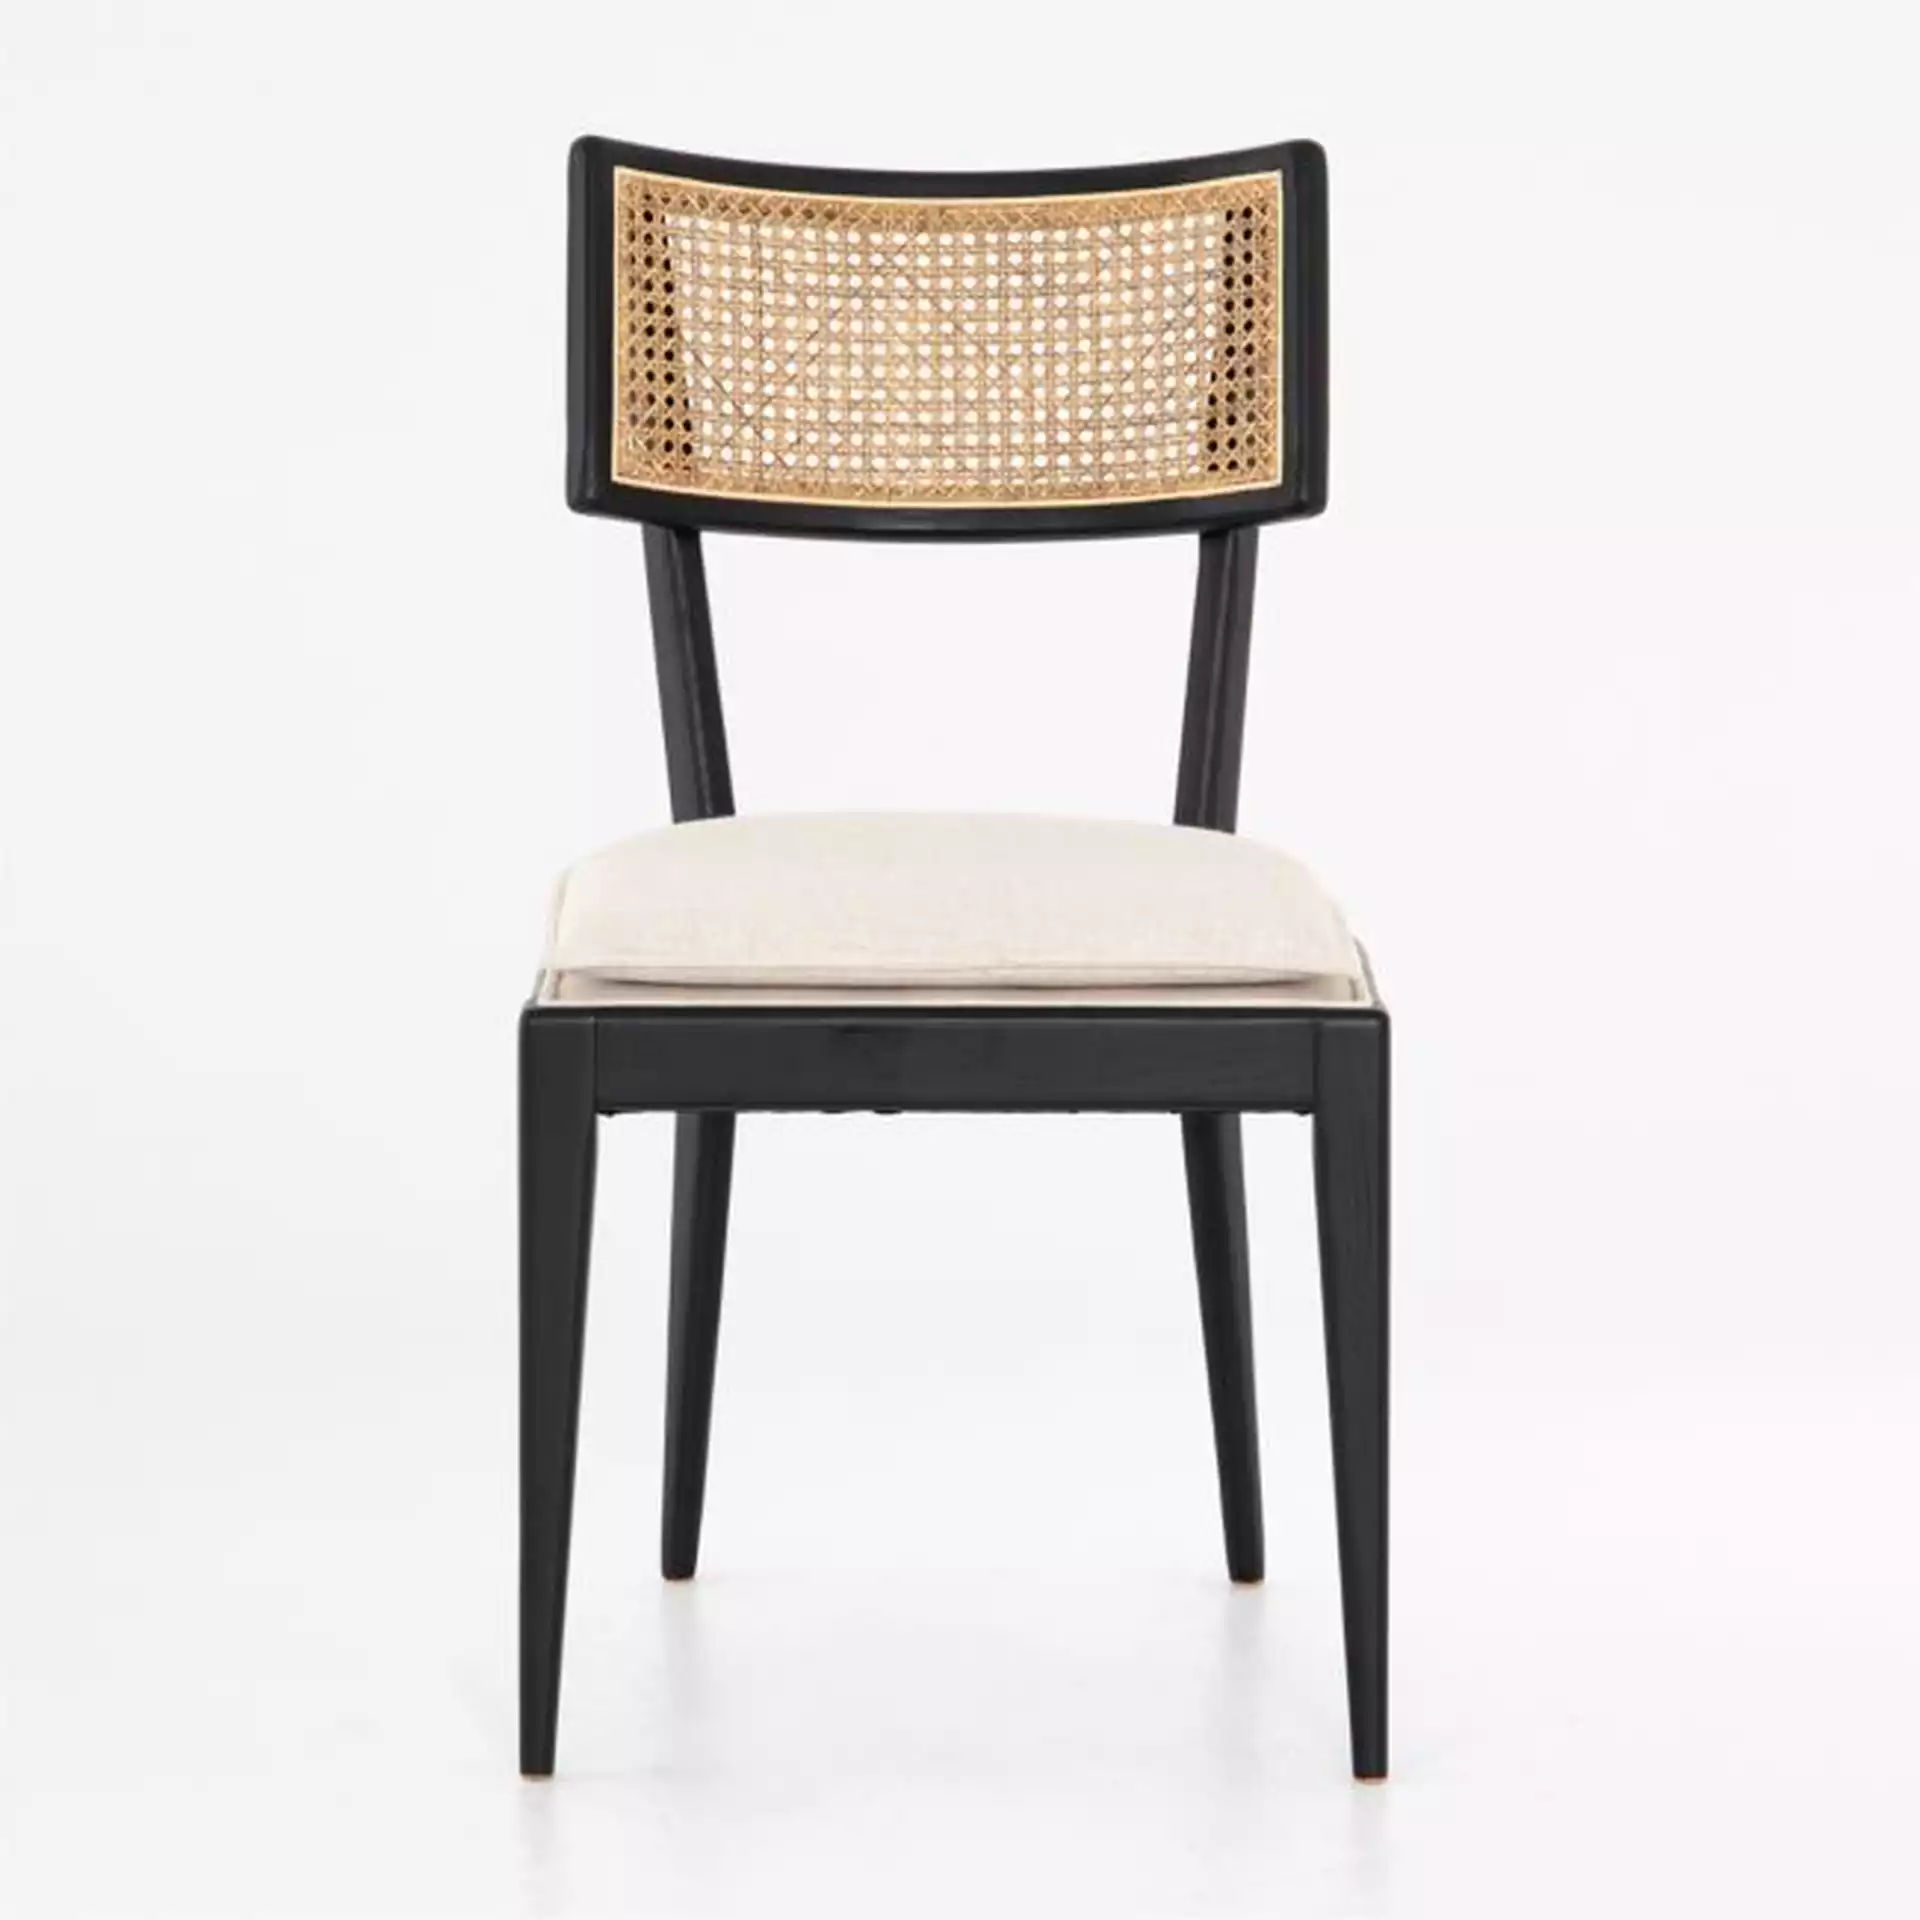 Libby Cane Dining Chair, Black